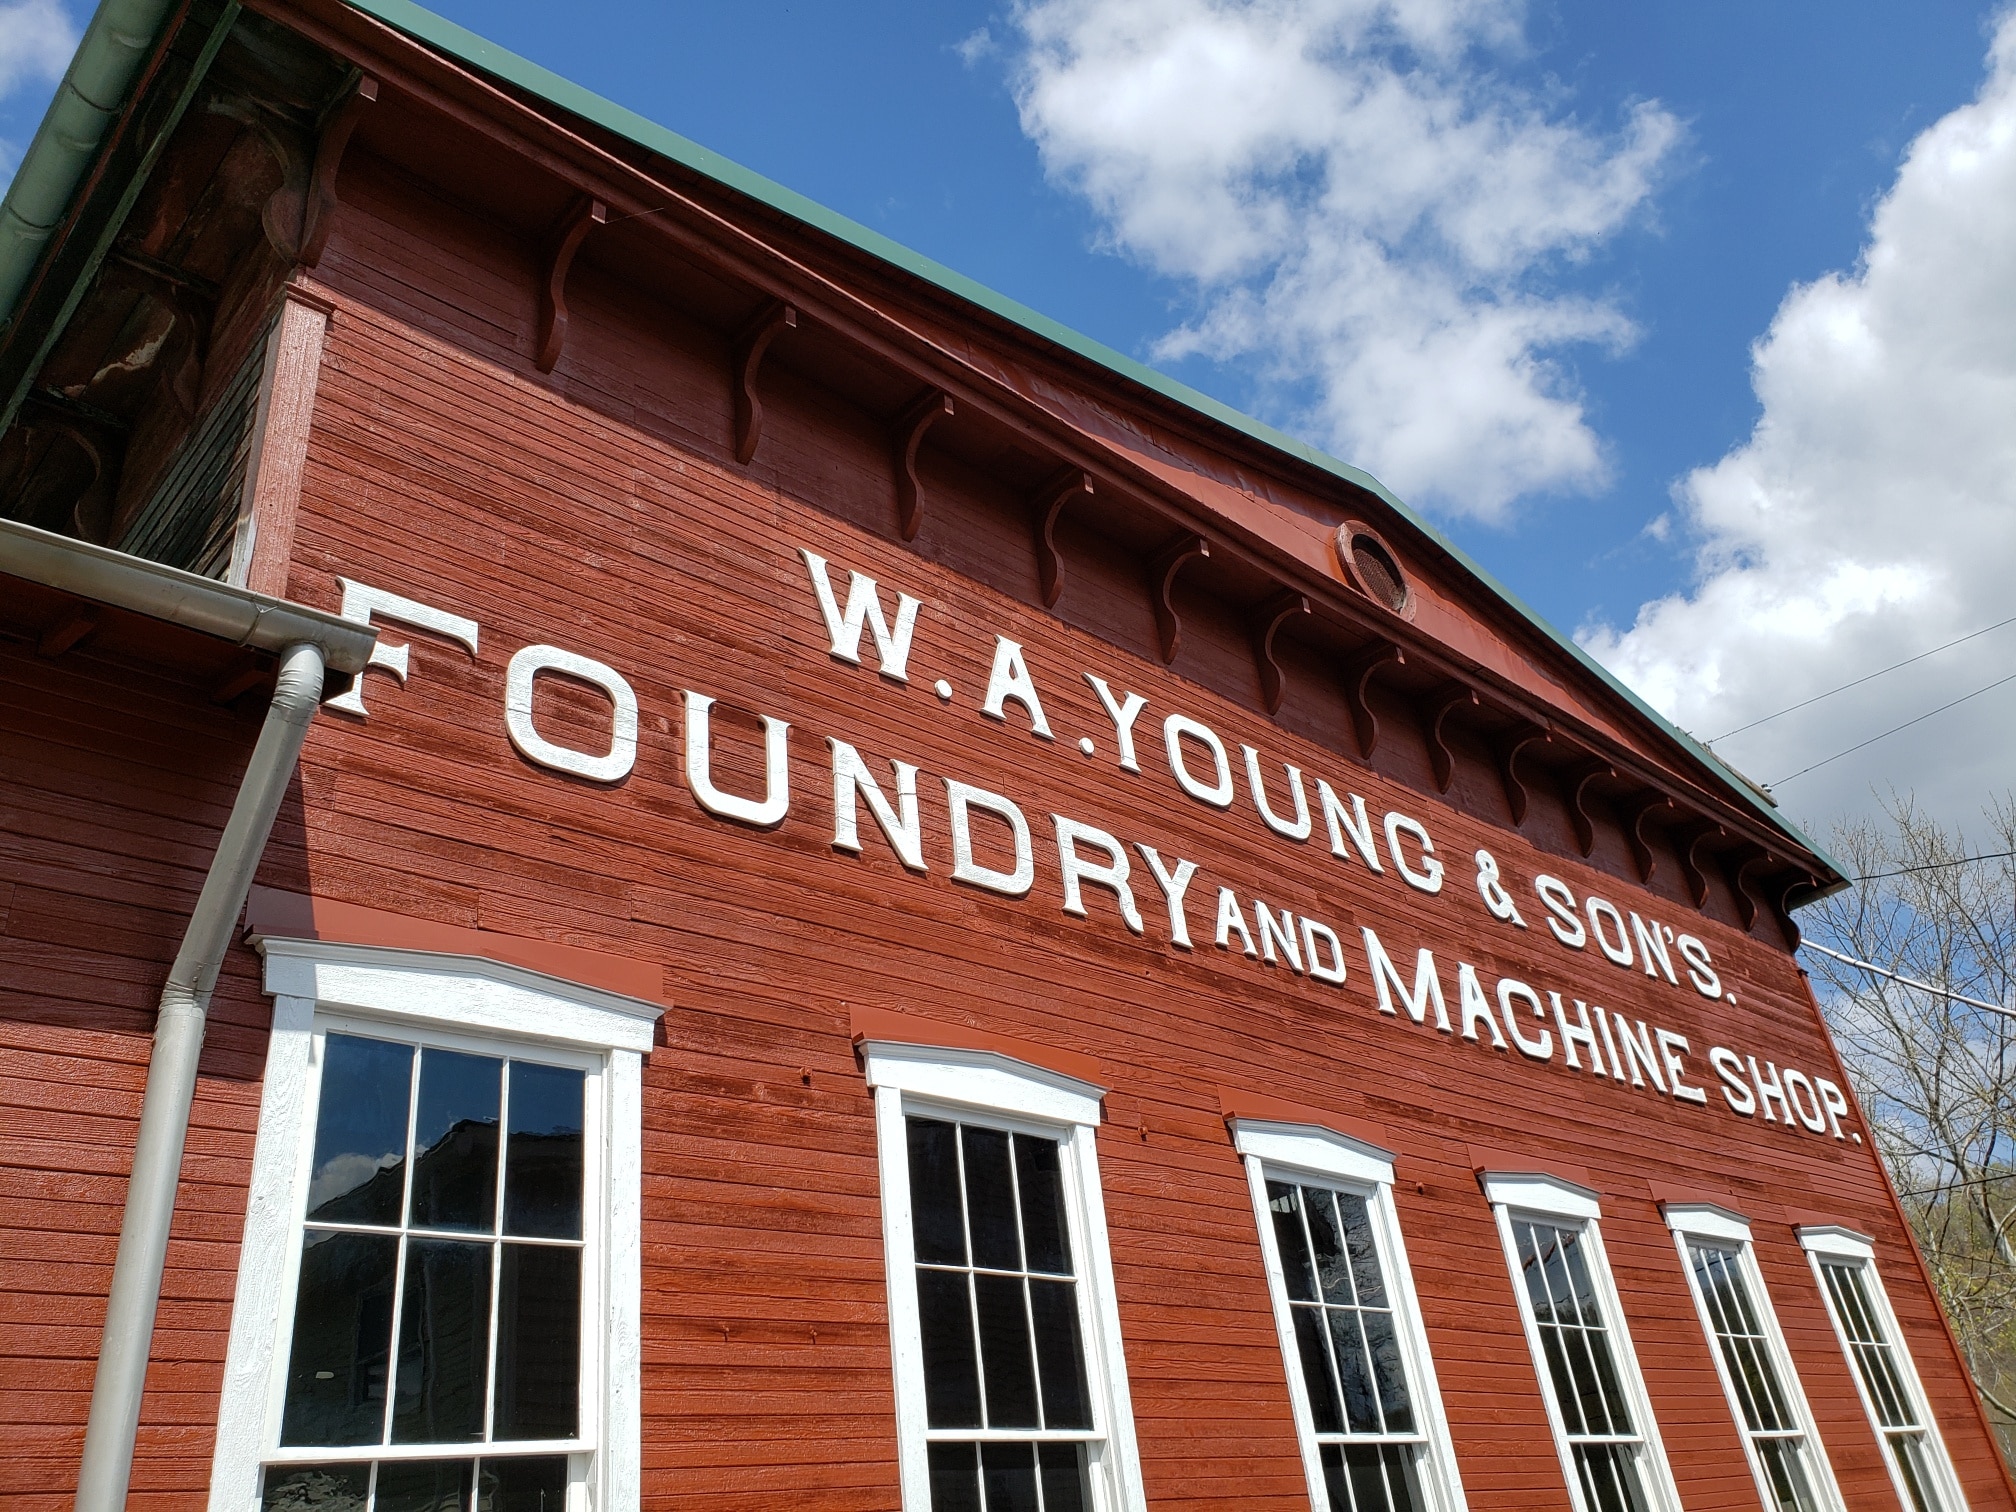 https://visitgreene.org/wp-content/uploads/2021/05/Foundry-and-Machine-Shop-Outside.jpg